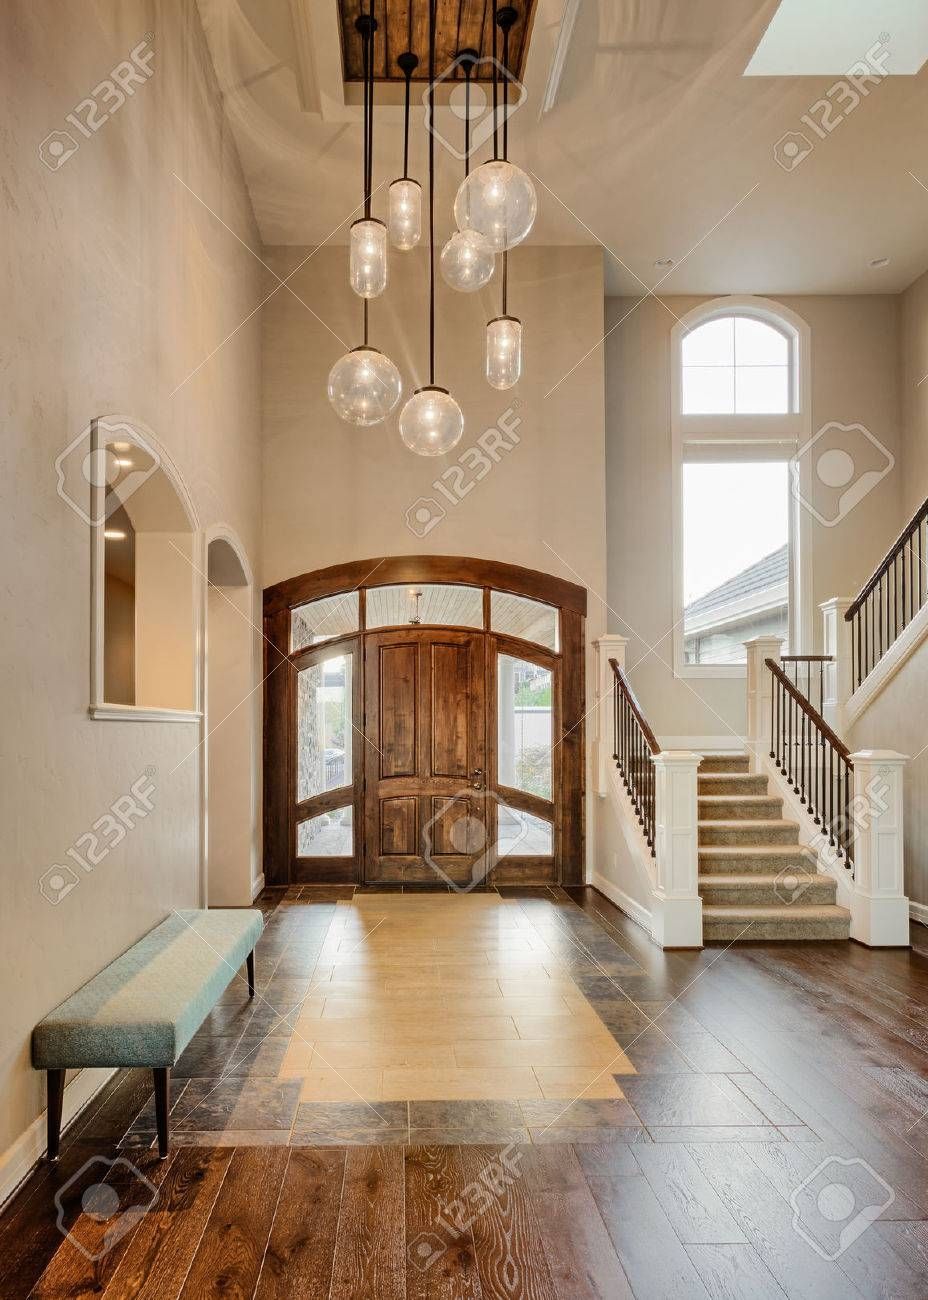 Beautiful Foyer In Home; Entryway With Stairs, Pendant Lights Throughout Pendant Lights For Entryway (View 4 of 15)